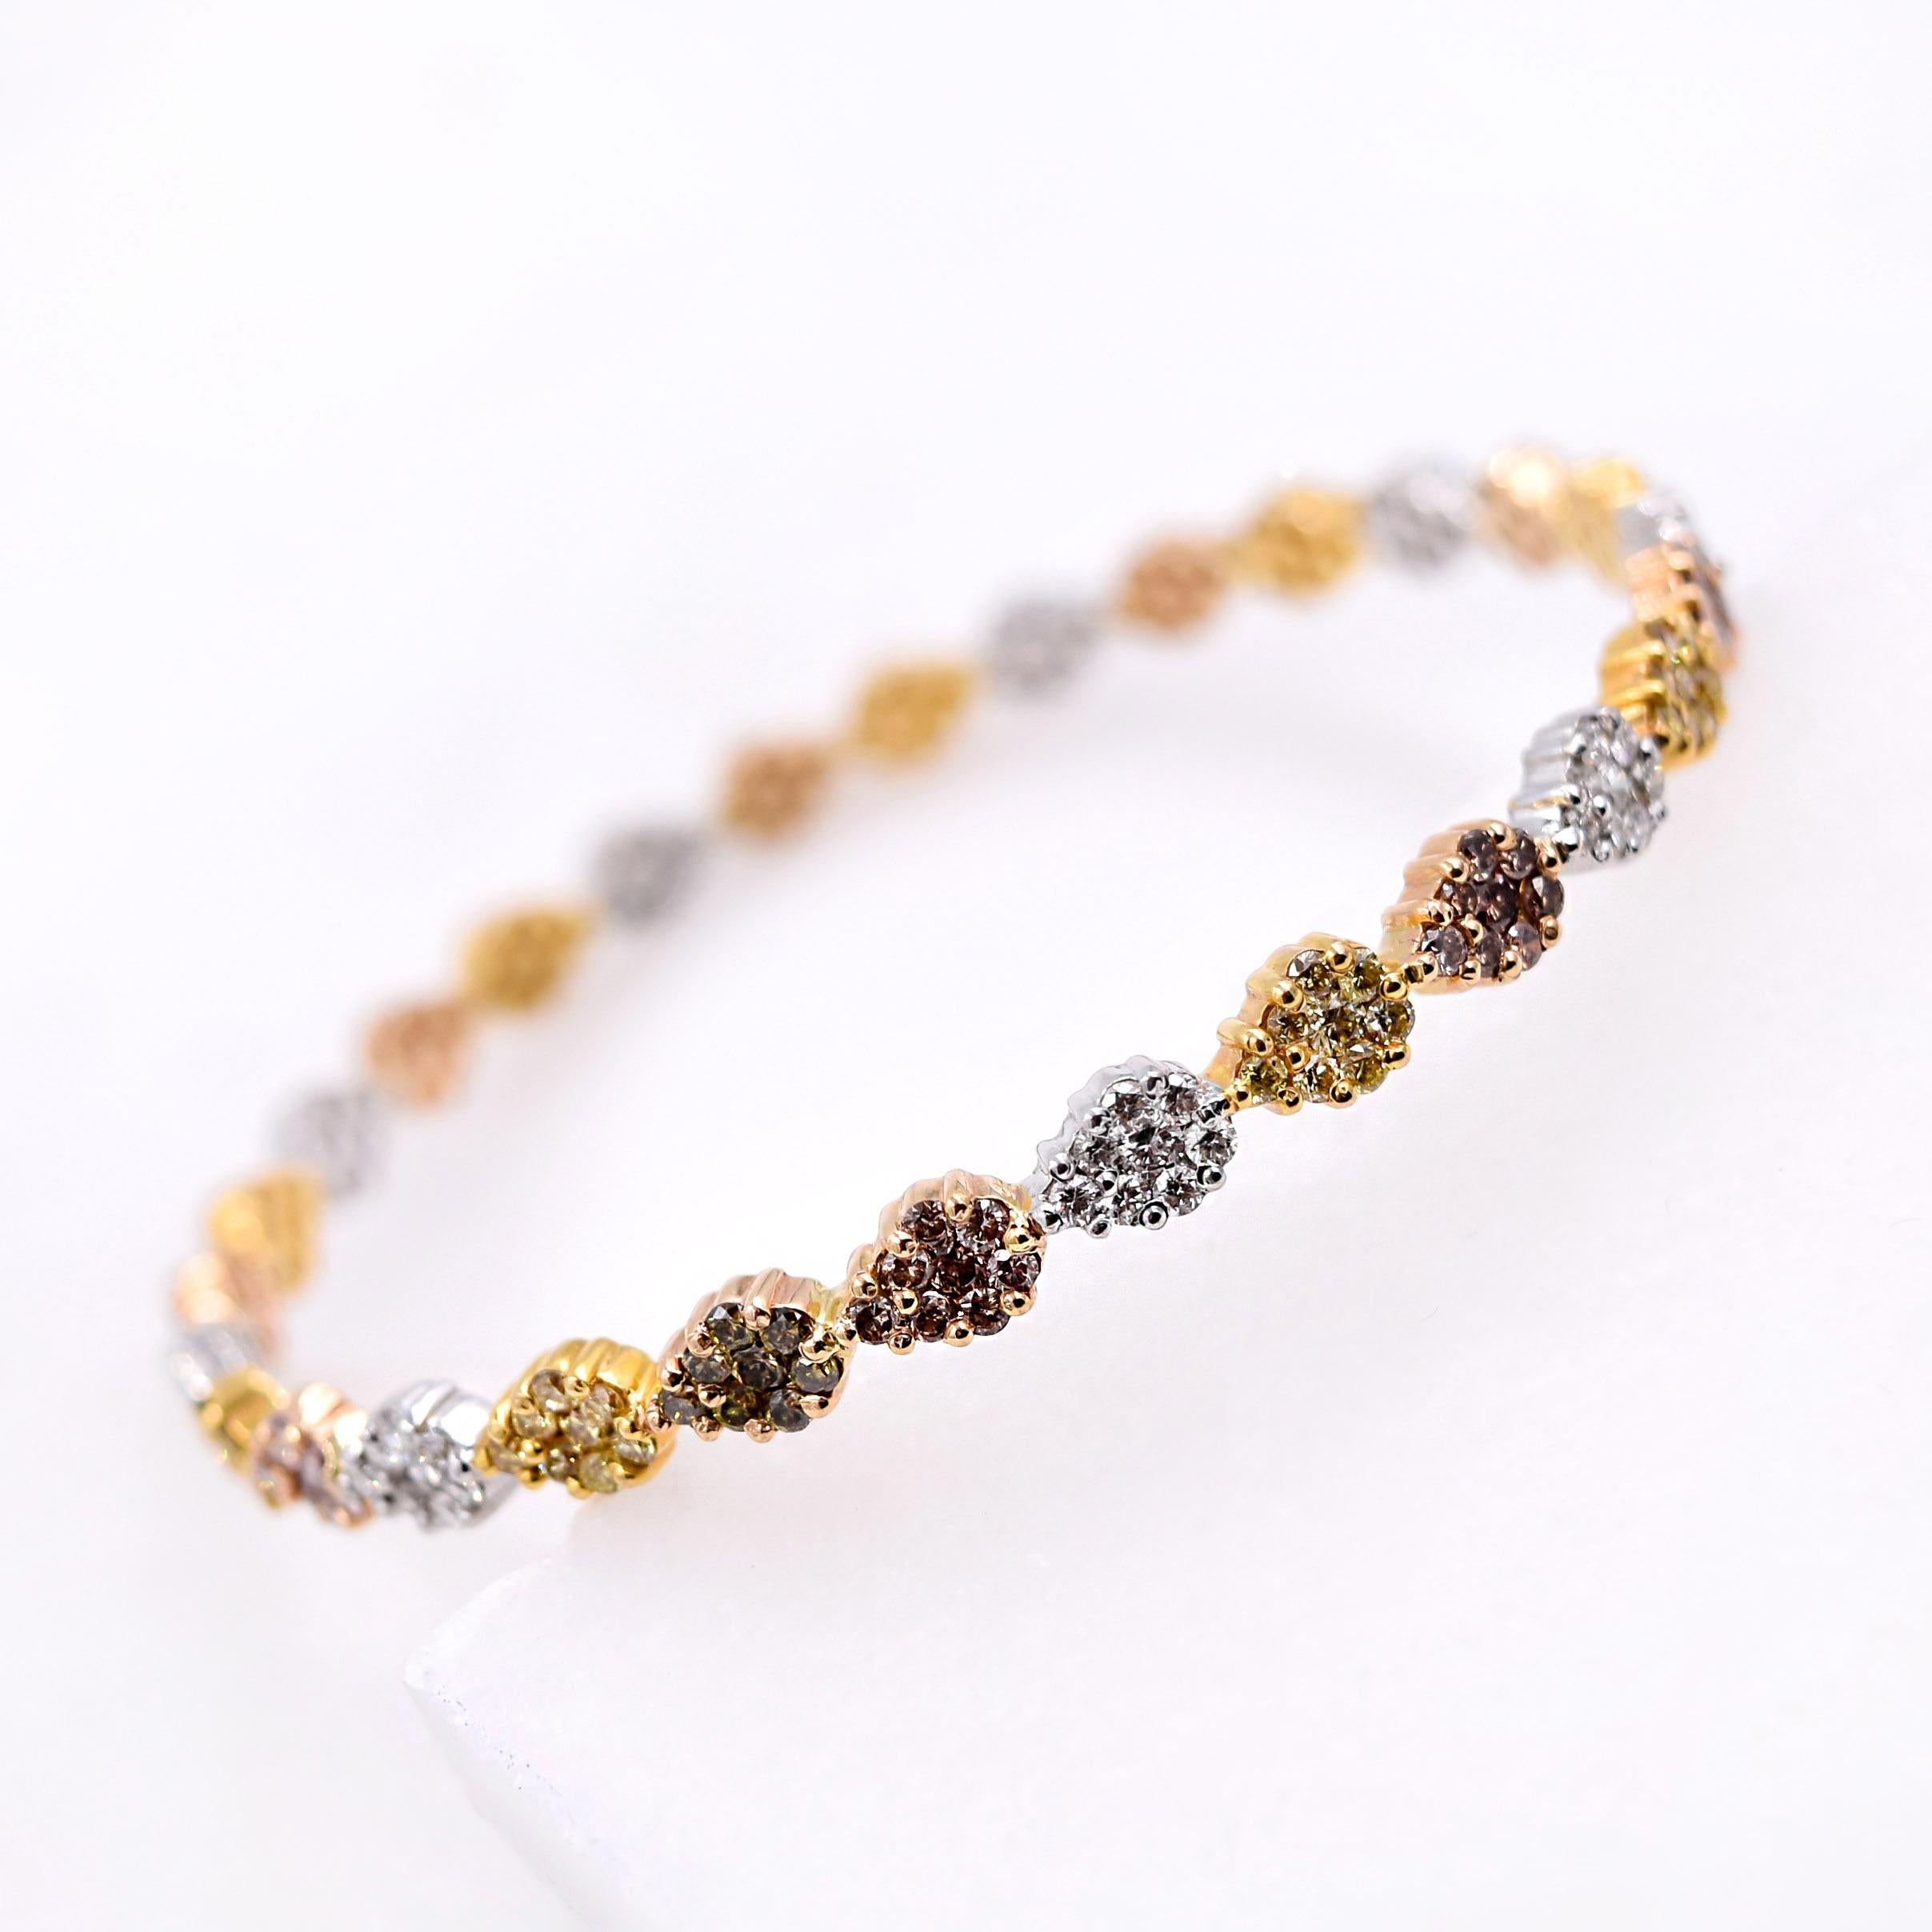 Vivaan Multicolored Diamond Bangle
- 5.89 Carats of Multicolored Round Diamonds
- Sections of 18 Karat White, Yellow, and Rose Gold
- Each Section holds 8 Diamonds in a Prong Setting
- Inside Diameter of the Bangle is 2.5 Inches
